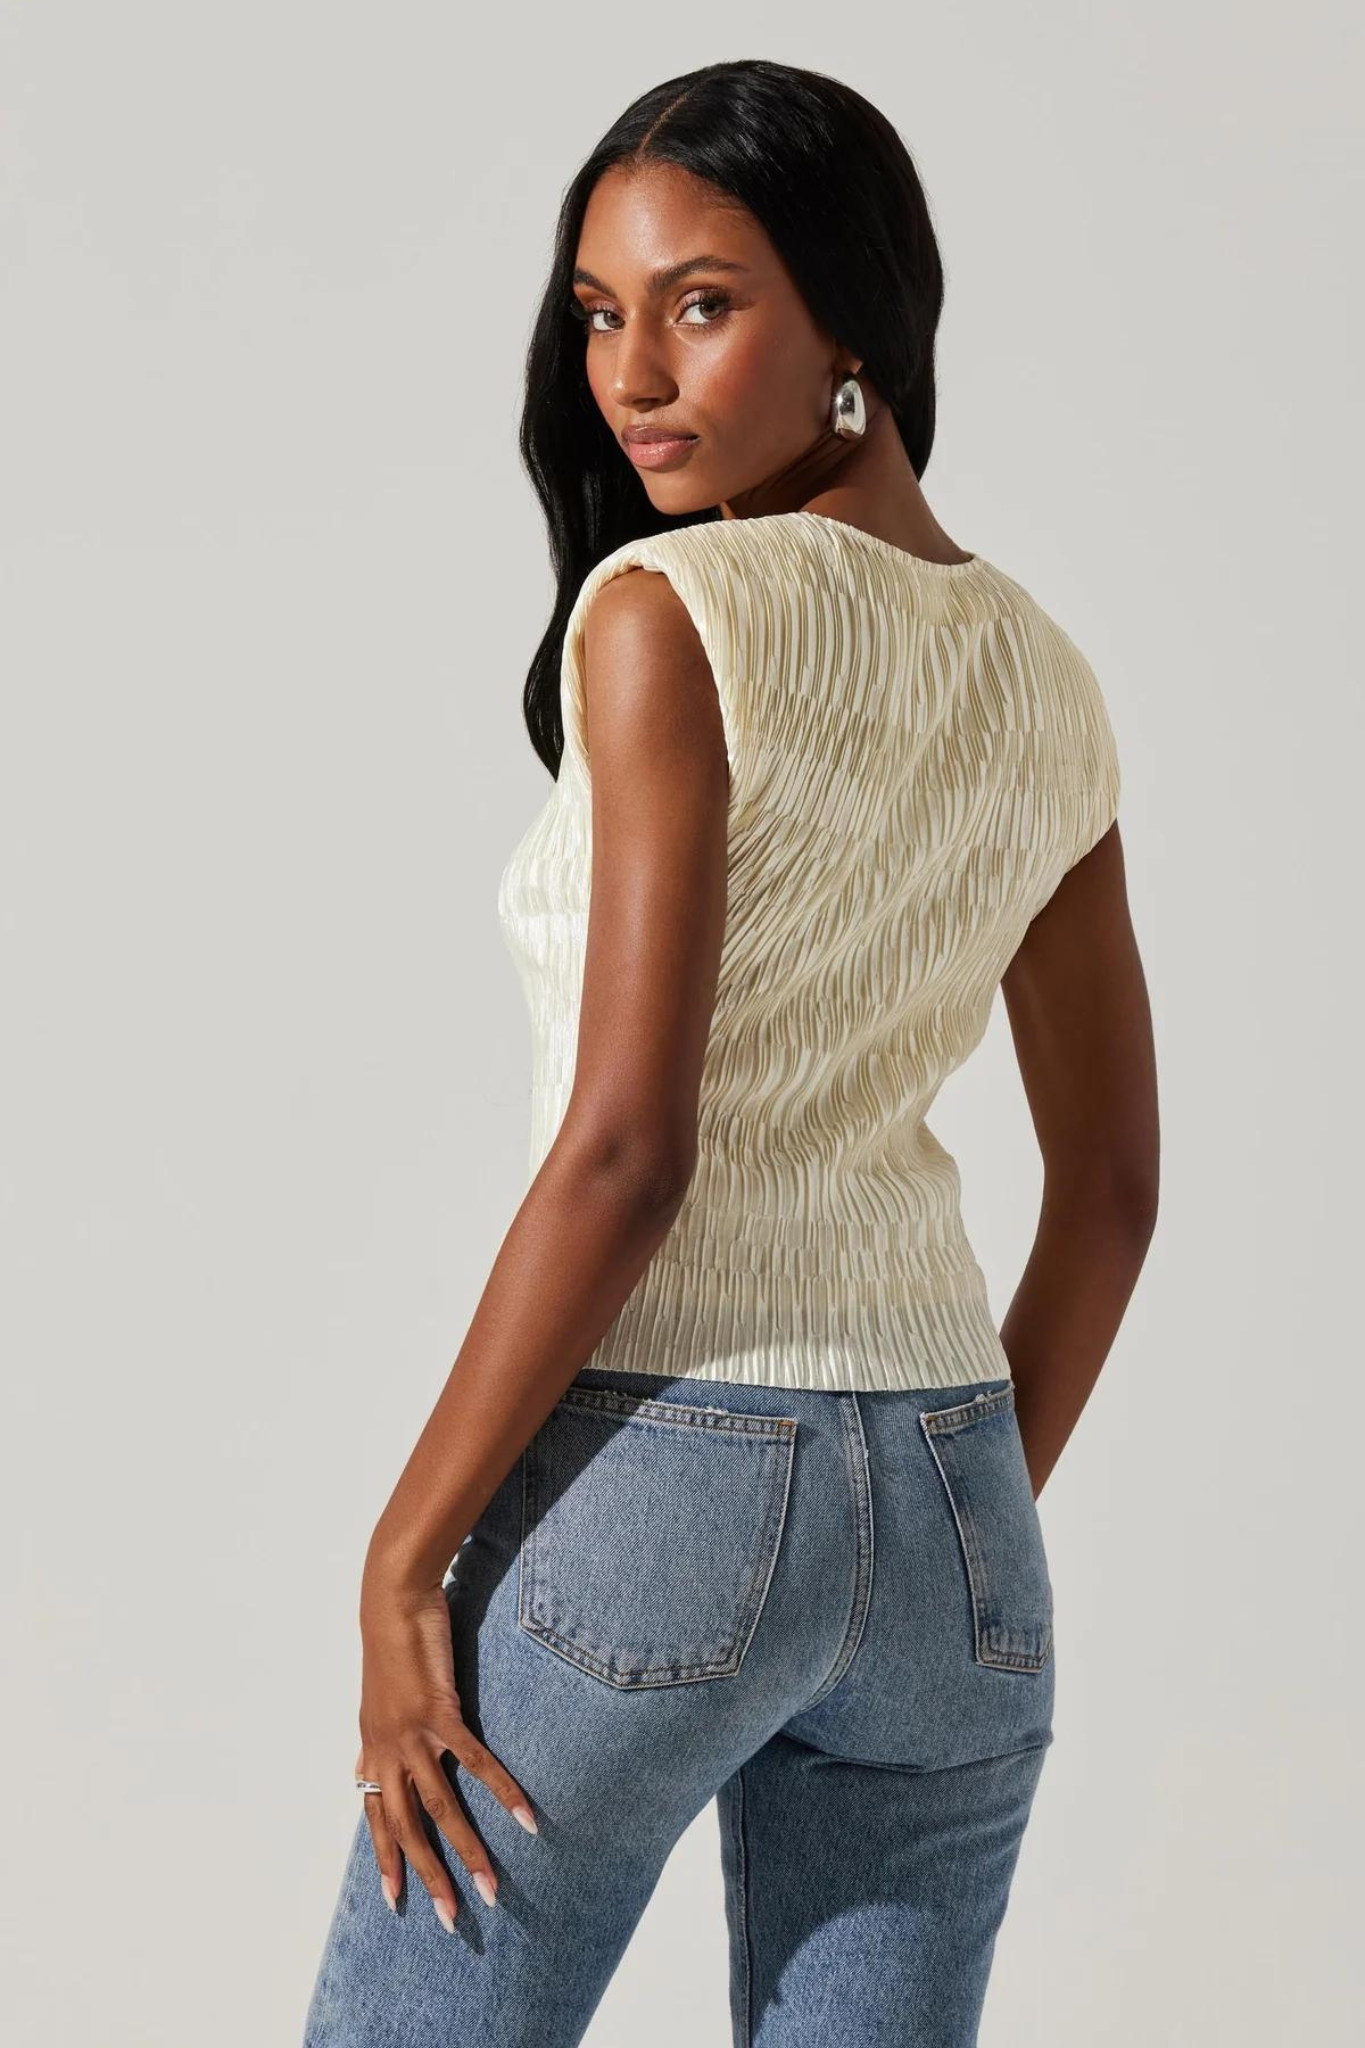 ASTR The Label | Off White Textured Nyah Top | Sweetest Stitch